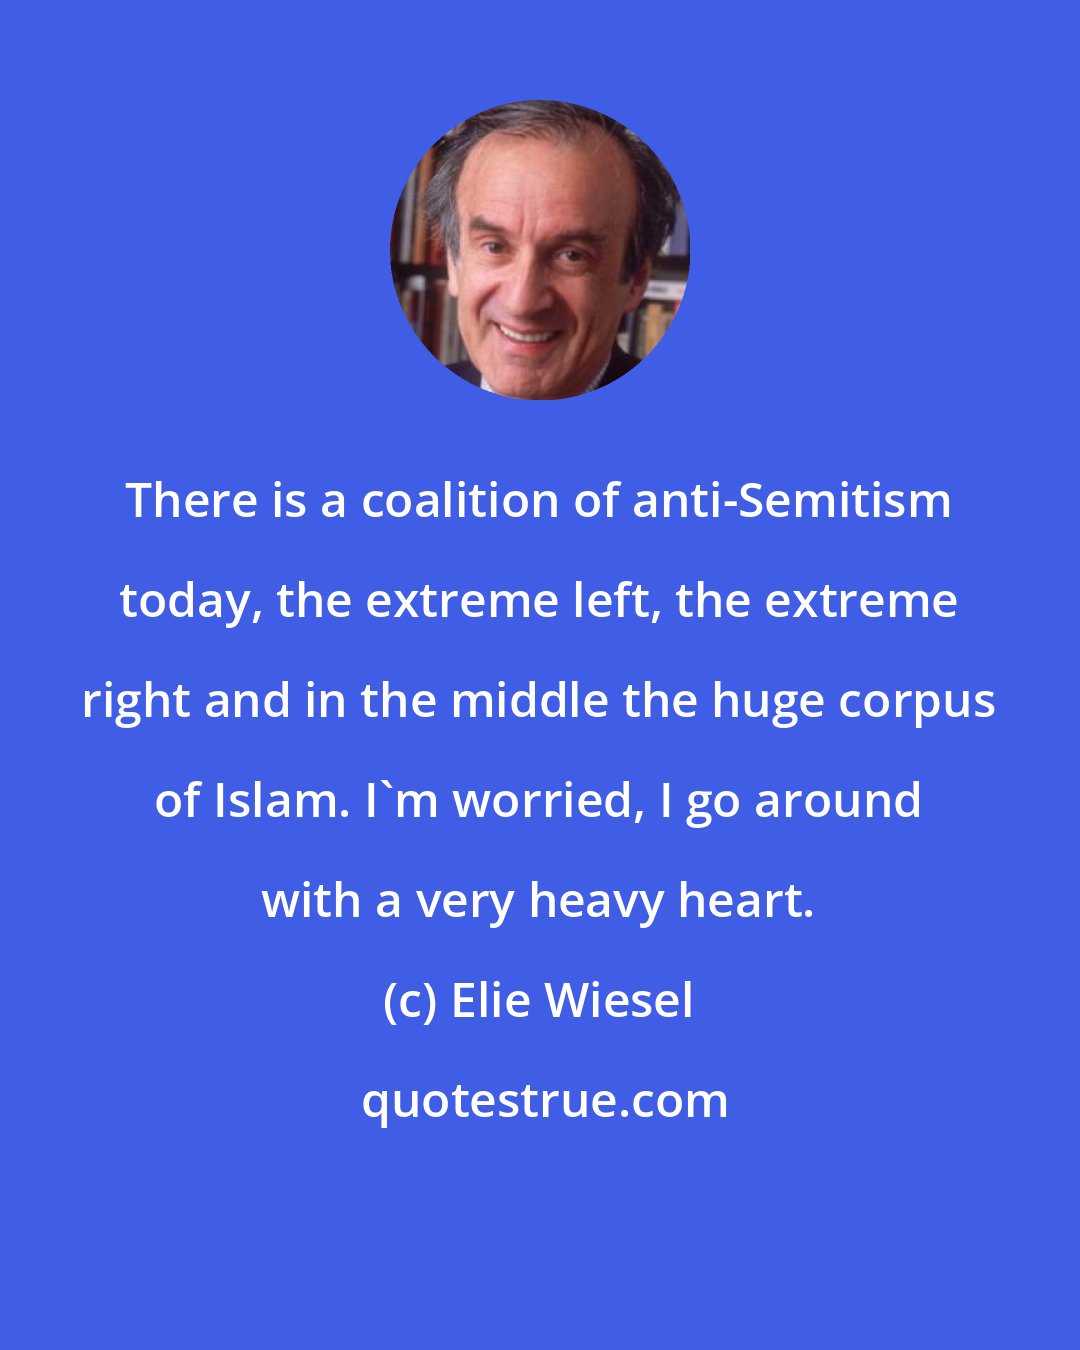 Elie Wiesel: There is a coalition of anti-Semitism today, the extreme left, the extreme right and in the middle the huge corpus of Islam. I'm worried, I go around with a very heavy heart.